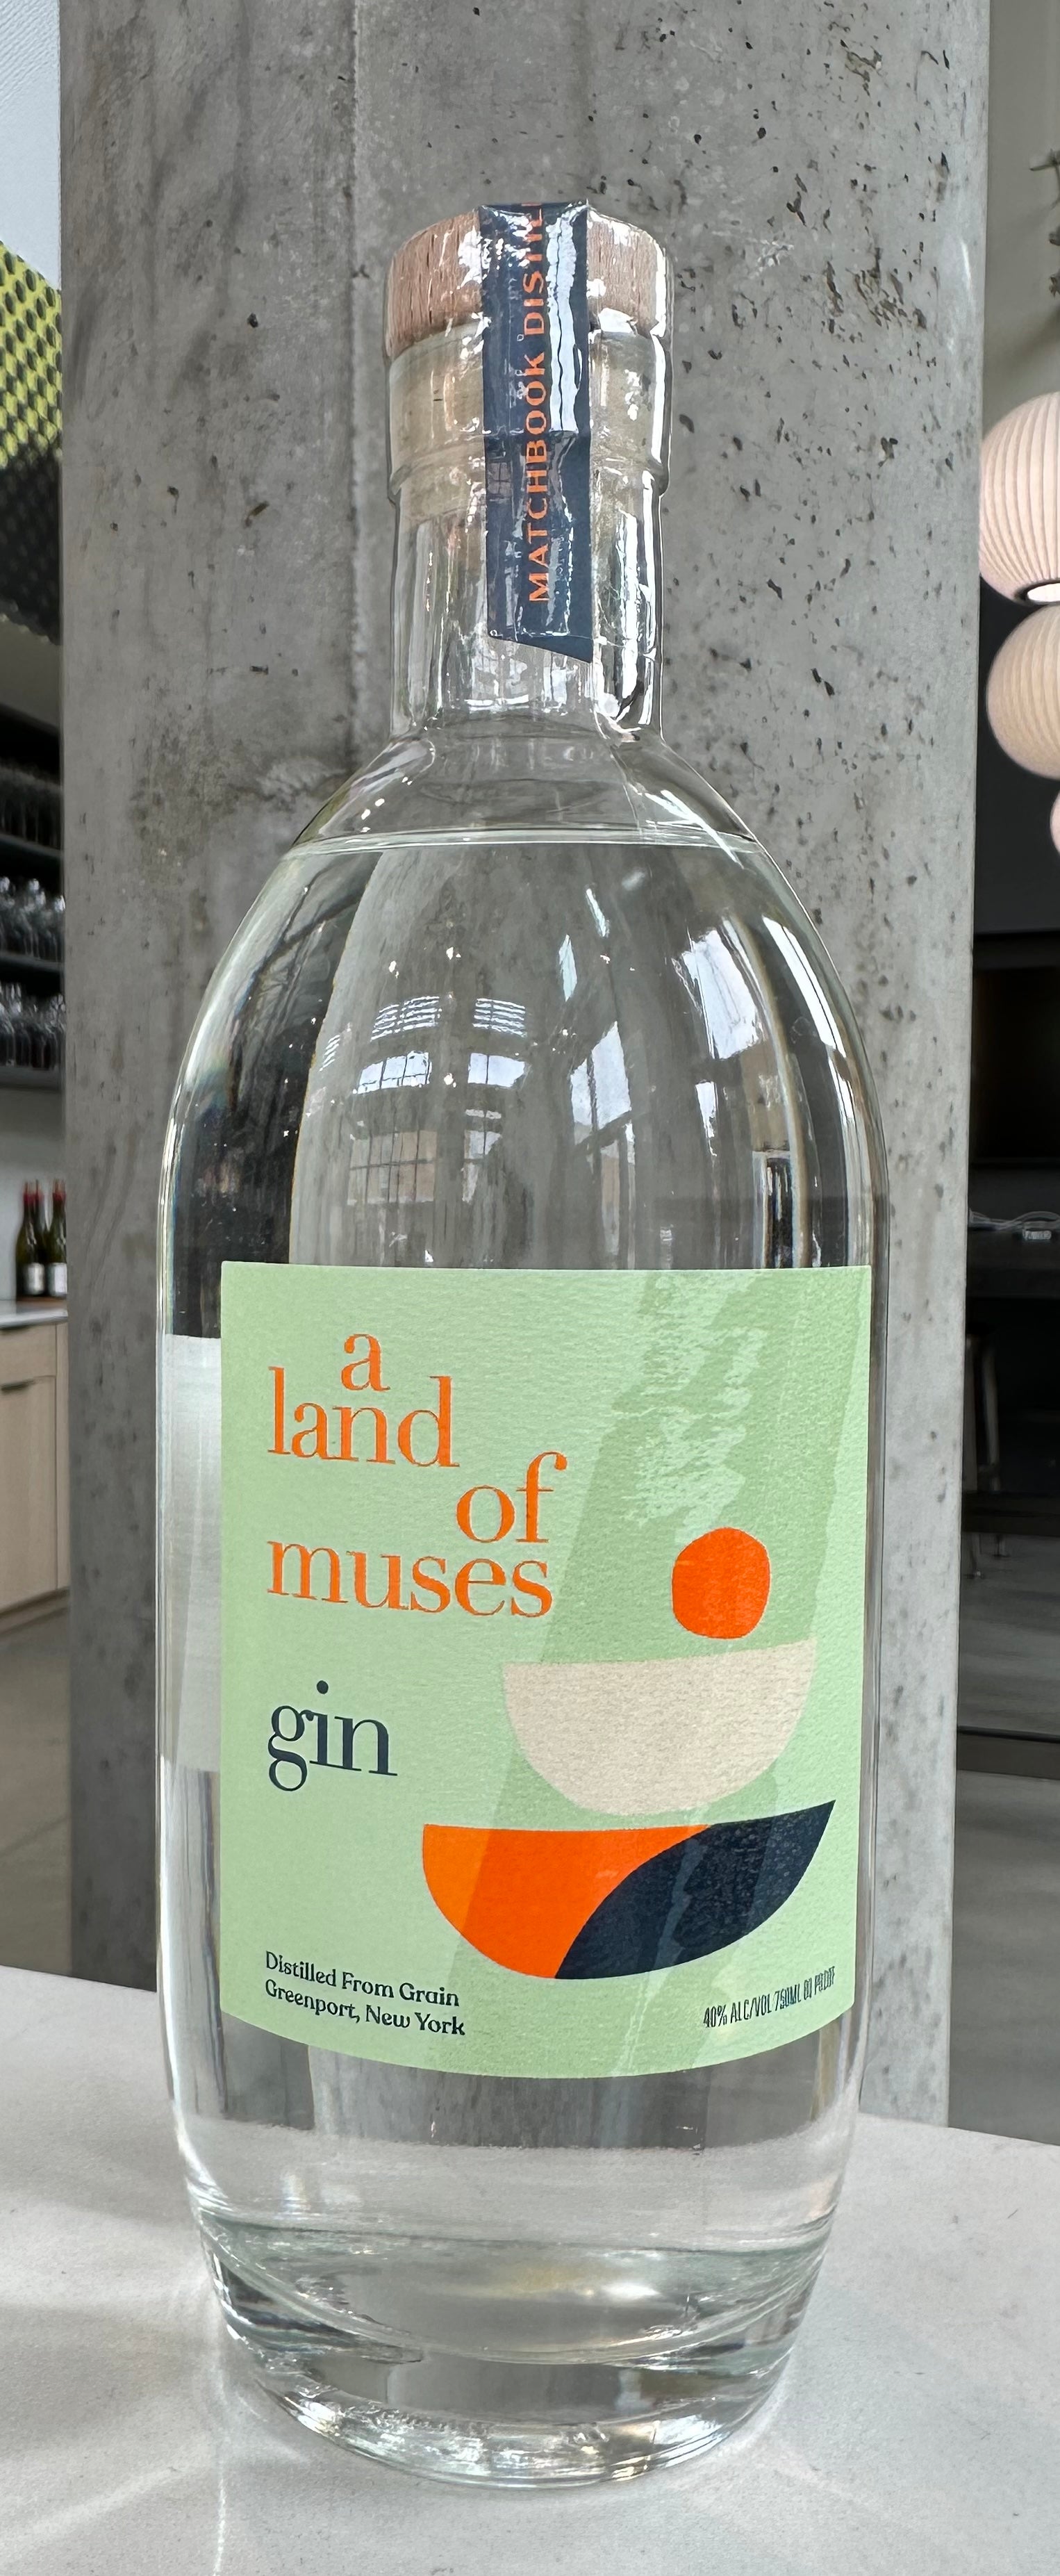 Matchbook Distilling "A Land of Muses" Gin